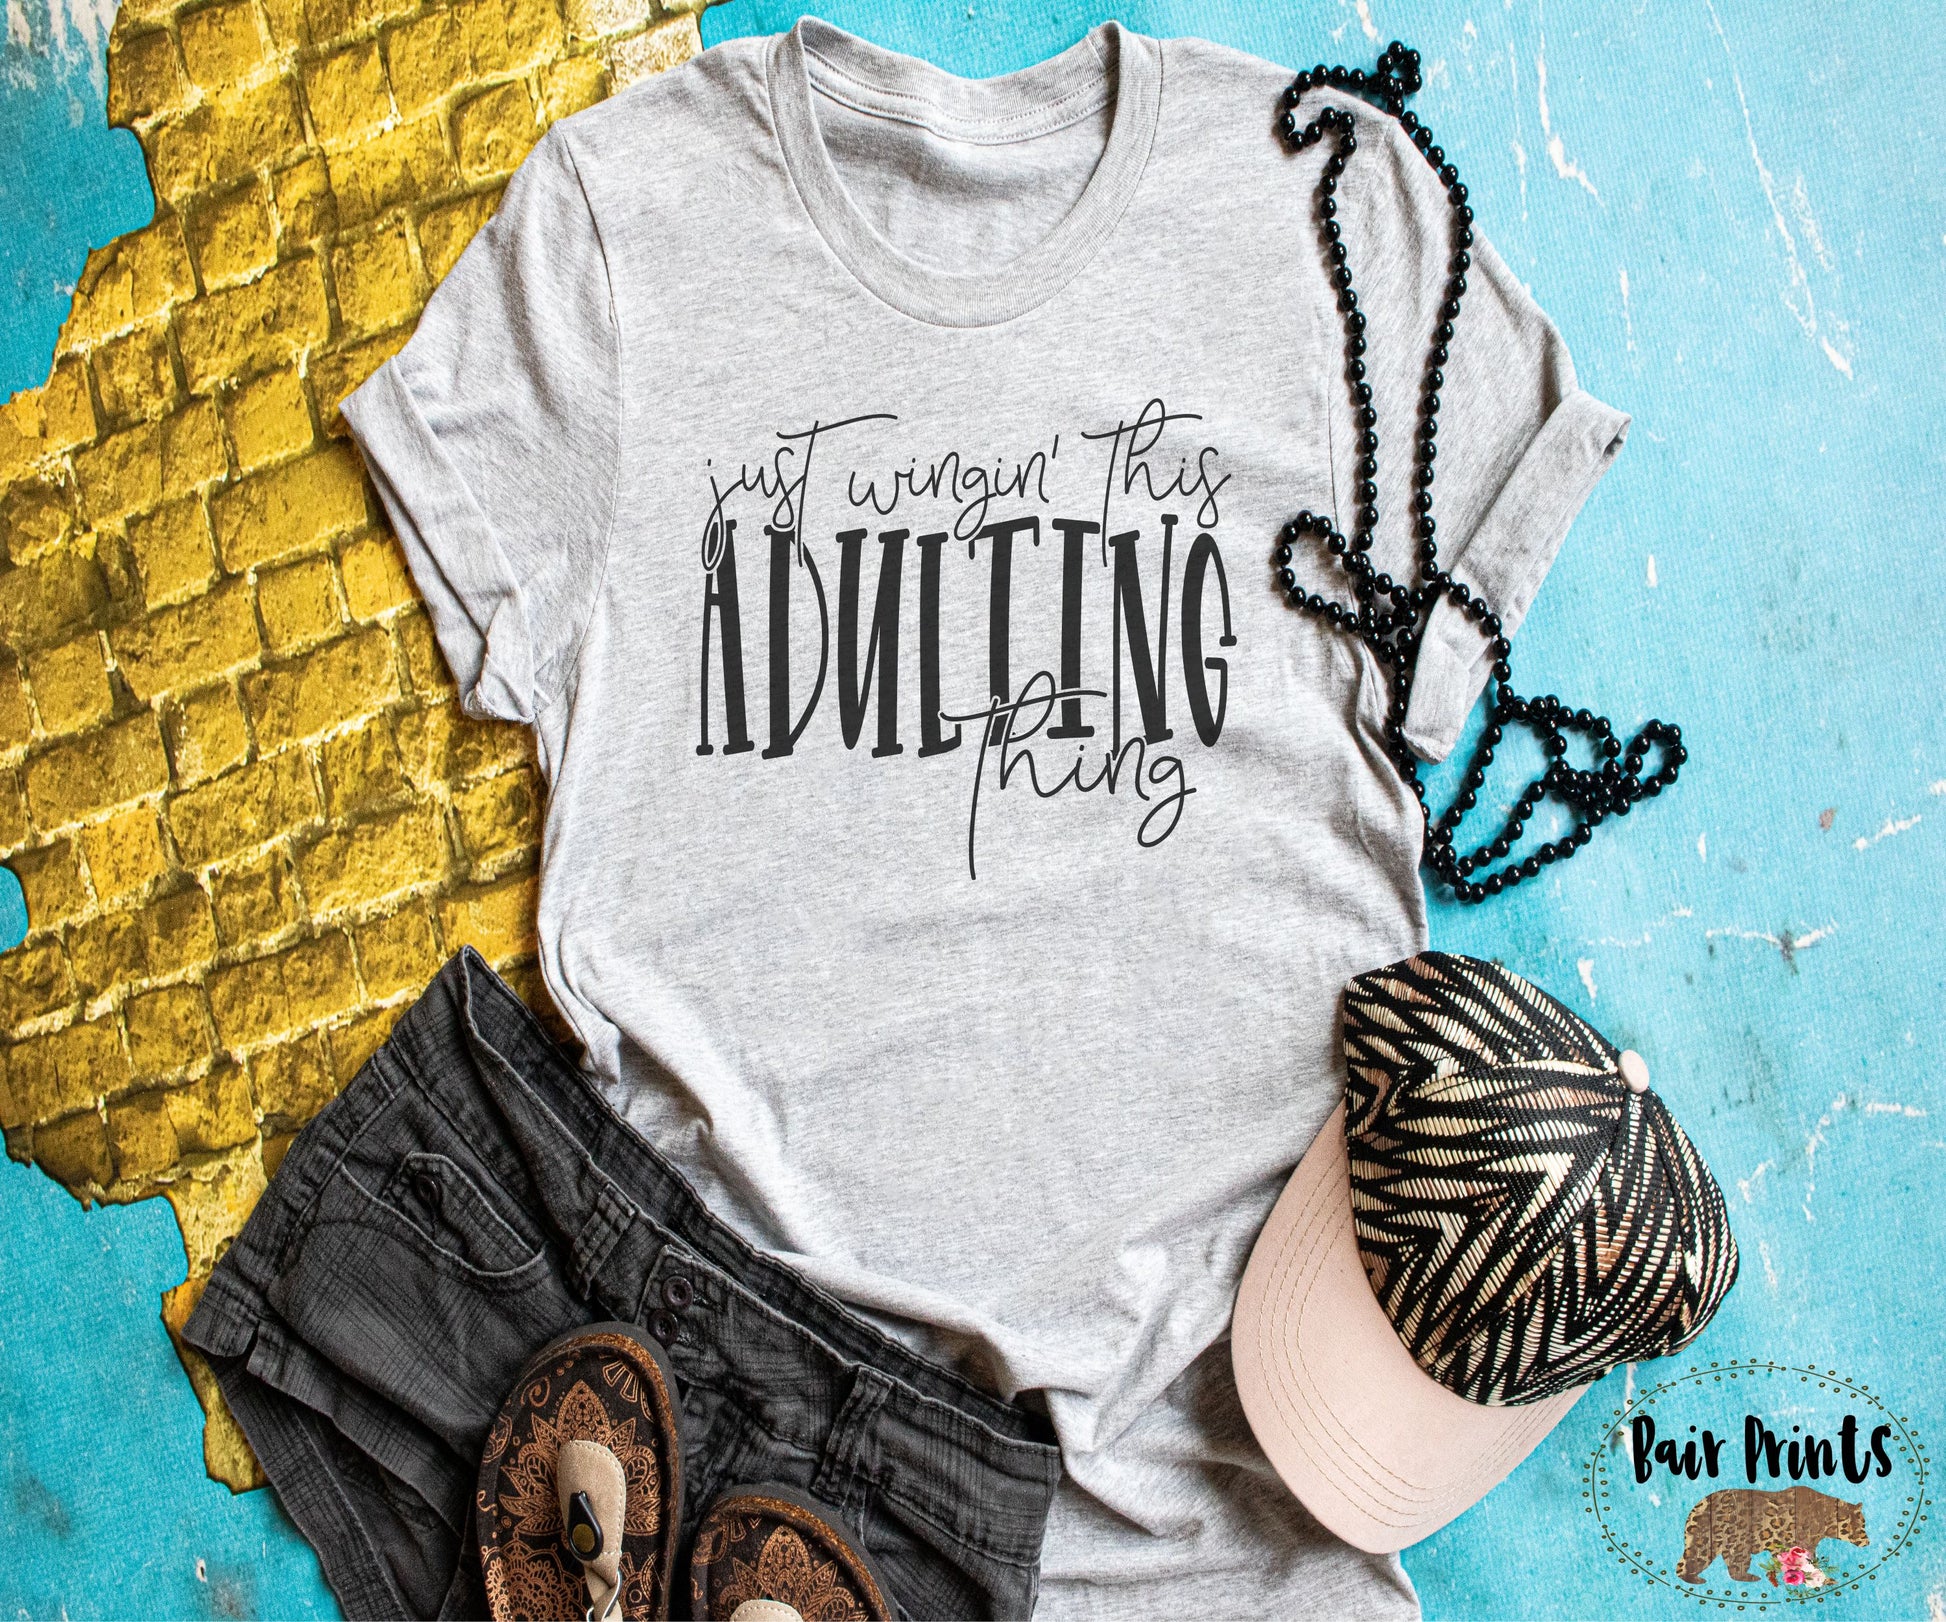 Just Winging the Adulting Thing Shirt. Snarky Womens Graphic Tee Shirt. Adult XS-3XL - Bair Prints